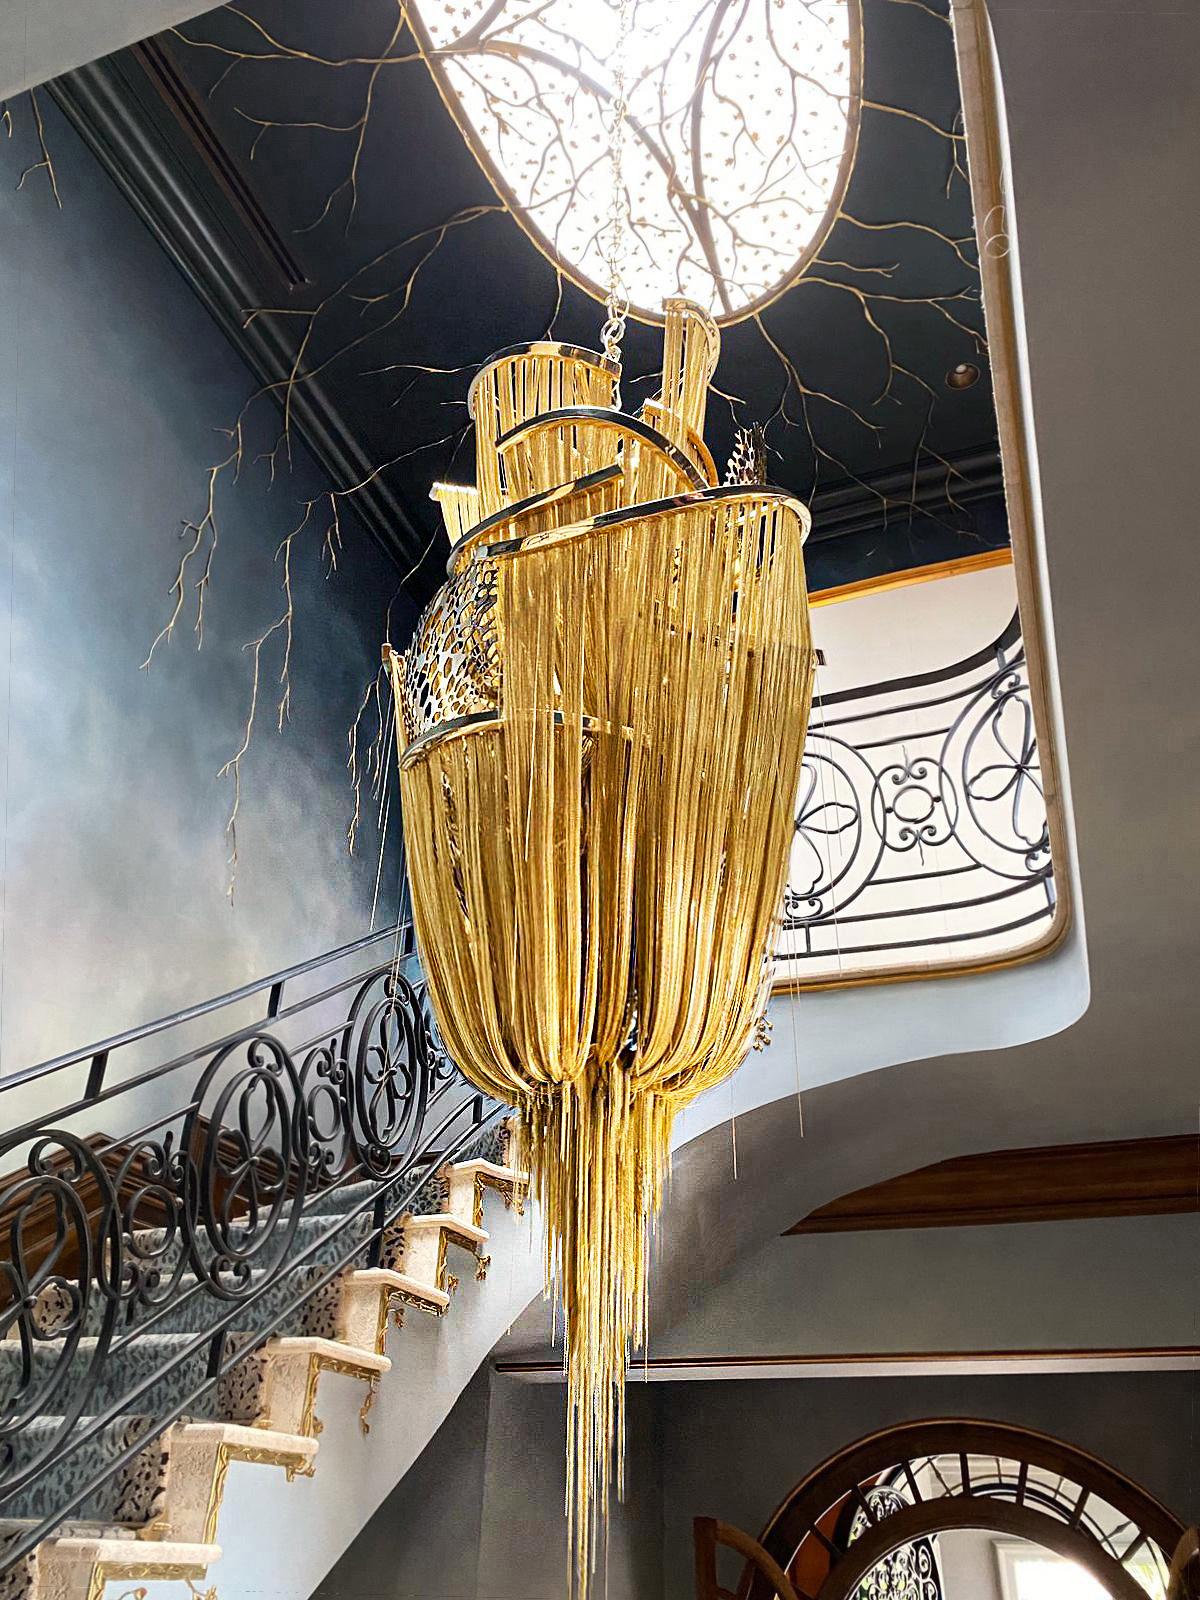 Barlas Baylar launched the first-ever chain chandelier in 2008. Following the expression of his genuine artistic vision that granted chain chandeliers to the interior design industry, he has inspired many other designers & companies. Before the